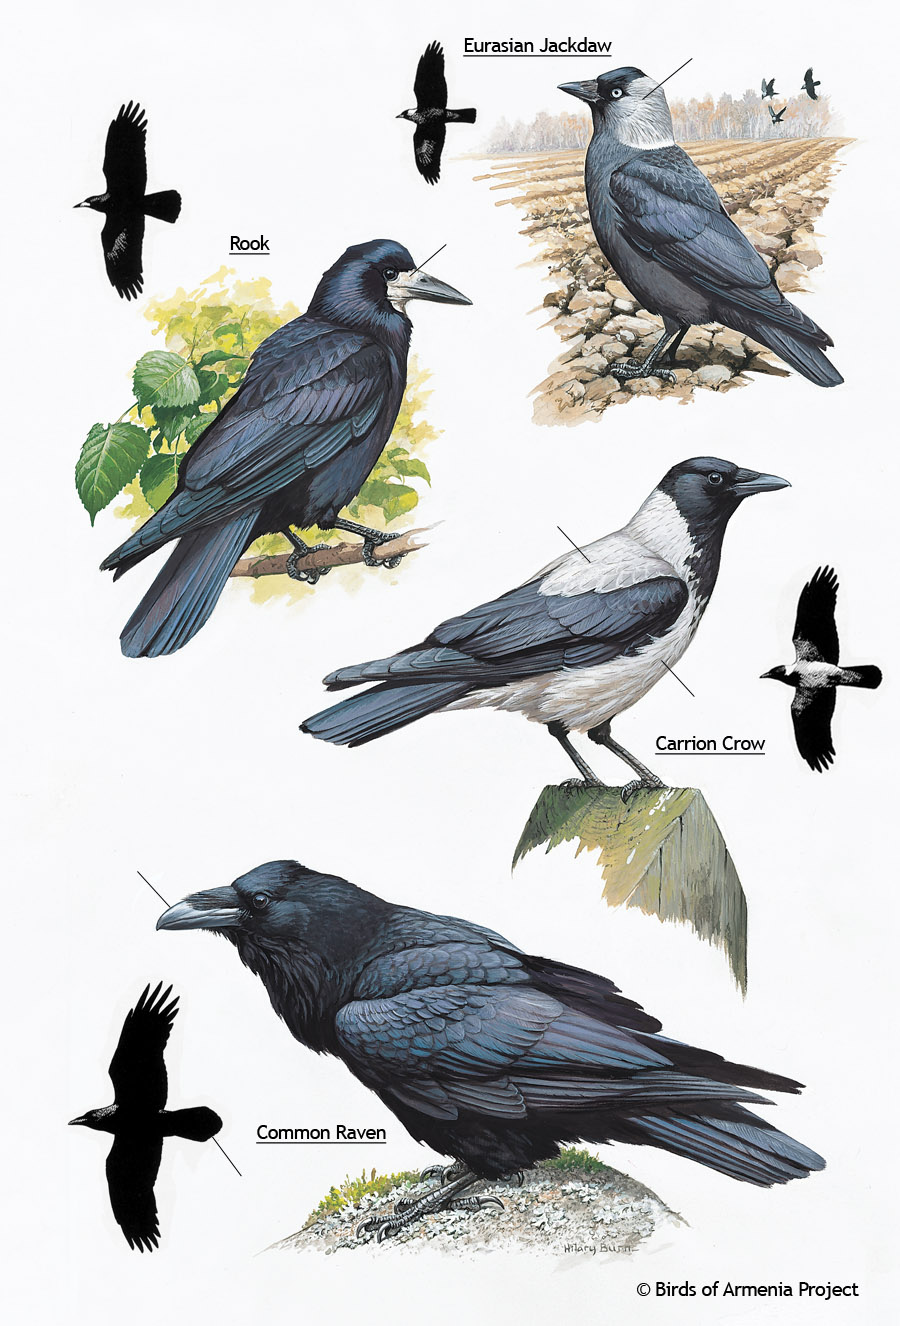 Jackdaws, Rooks, Crows and Ravens